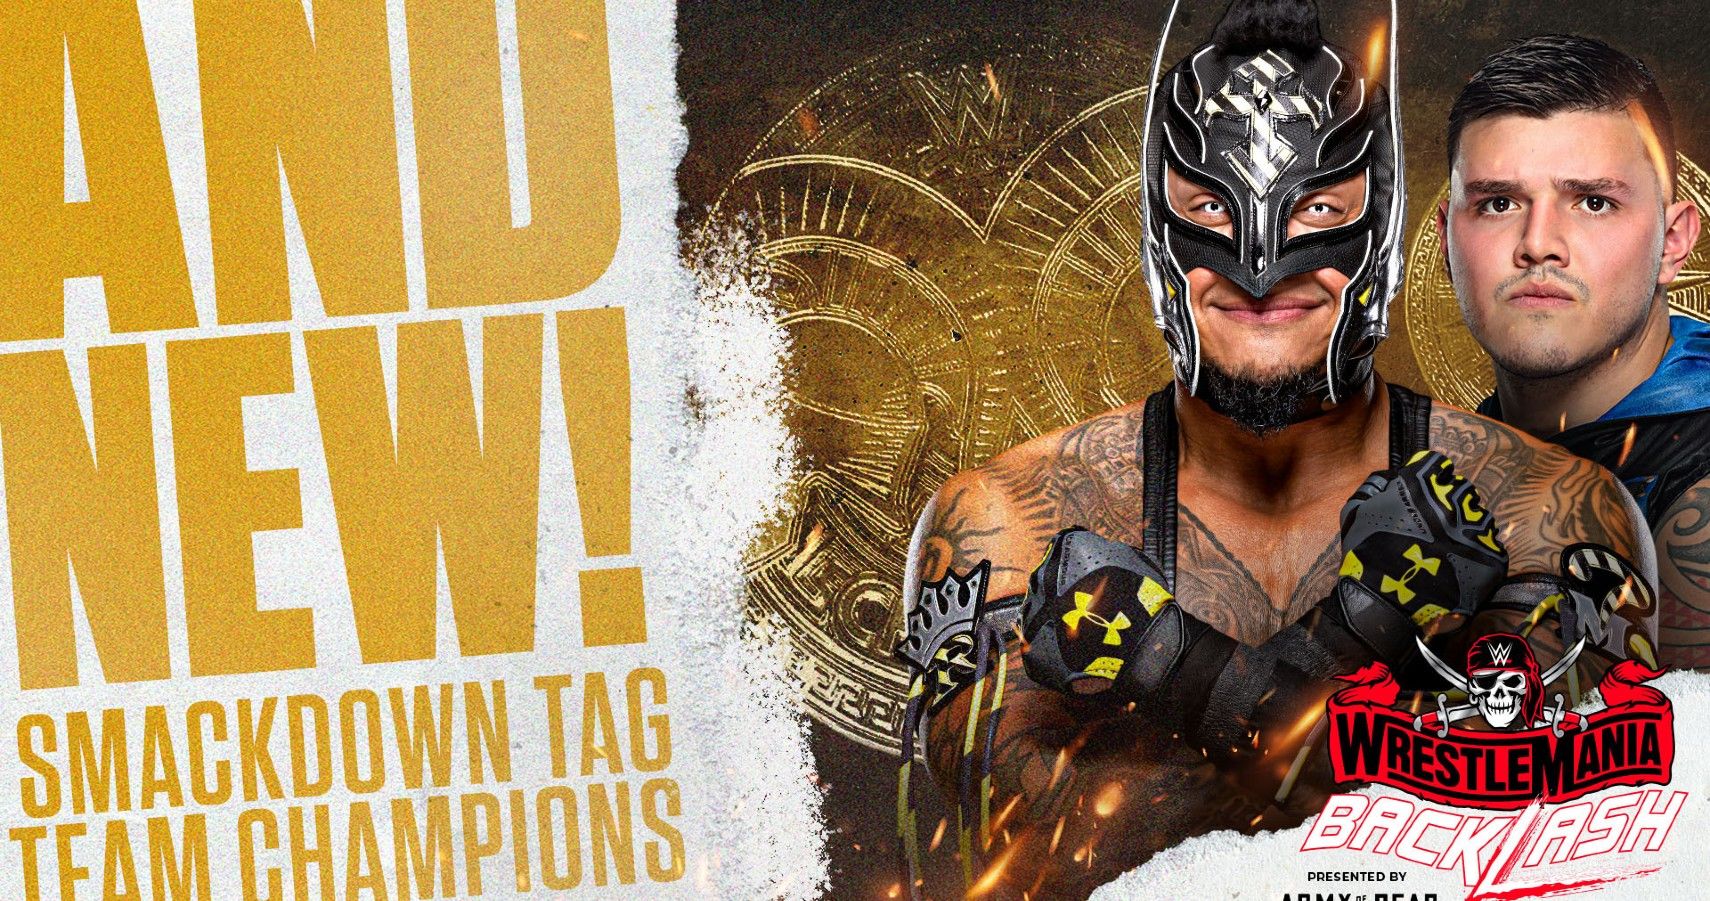 rey and dominik mysterio tag team champions